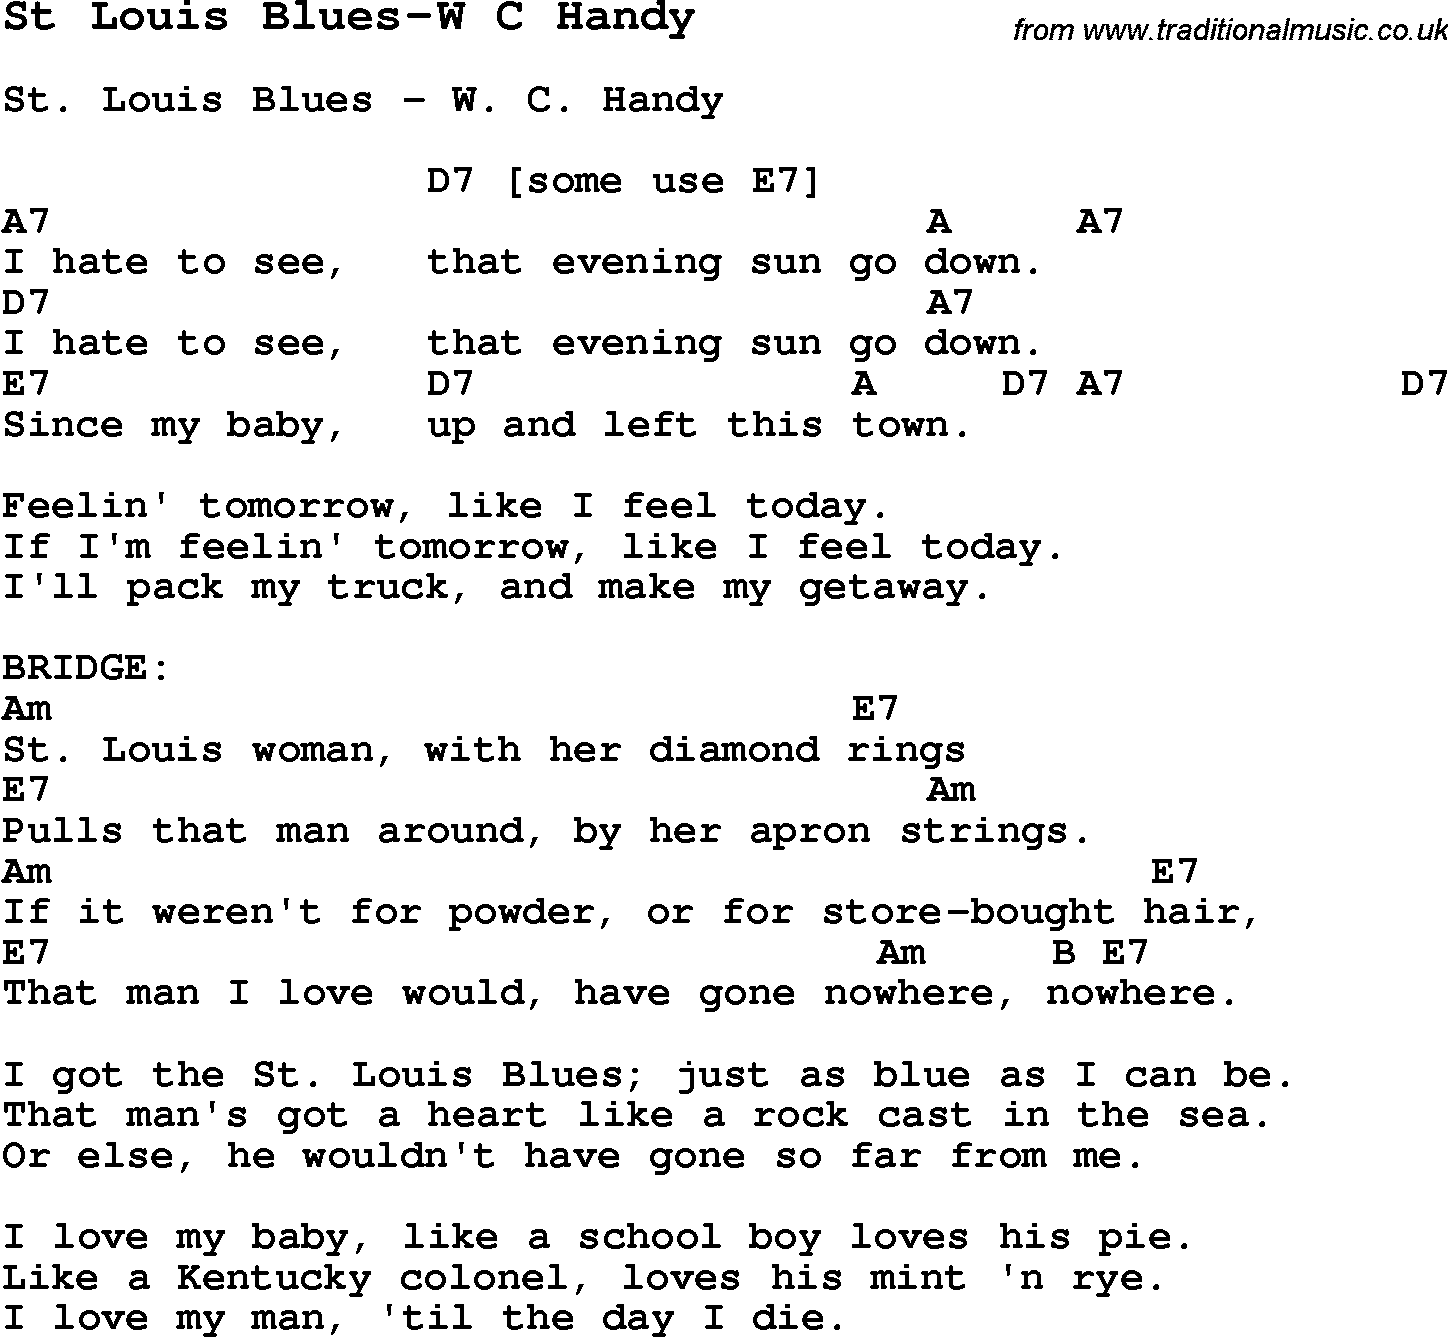 Blues Guitar Song, lyrics, chords, tablature, playing hints for St Louis Blues-W C Handy